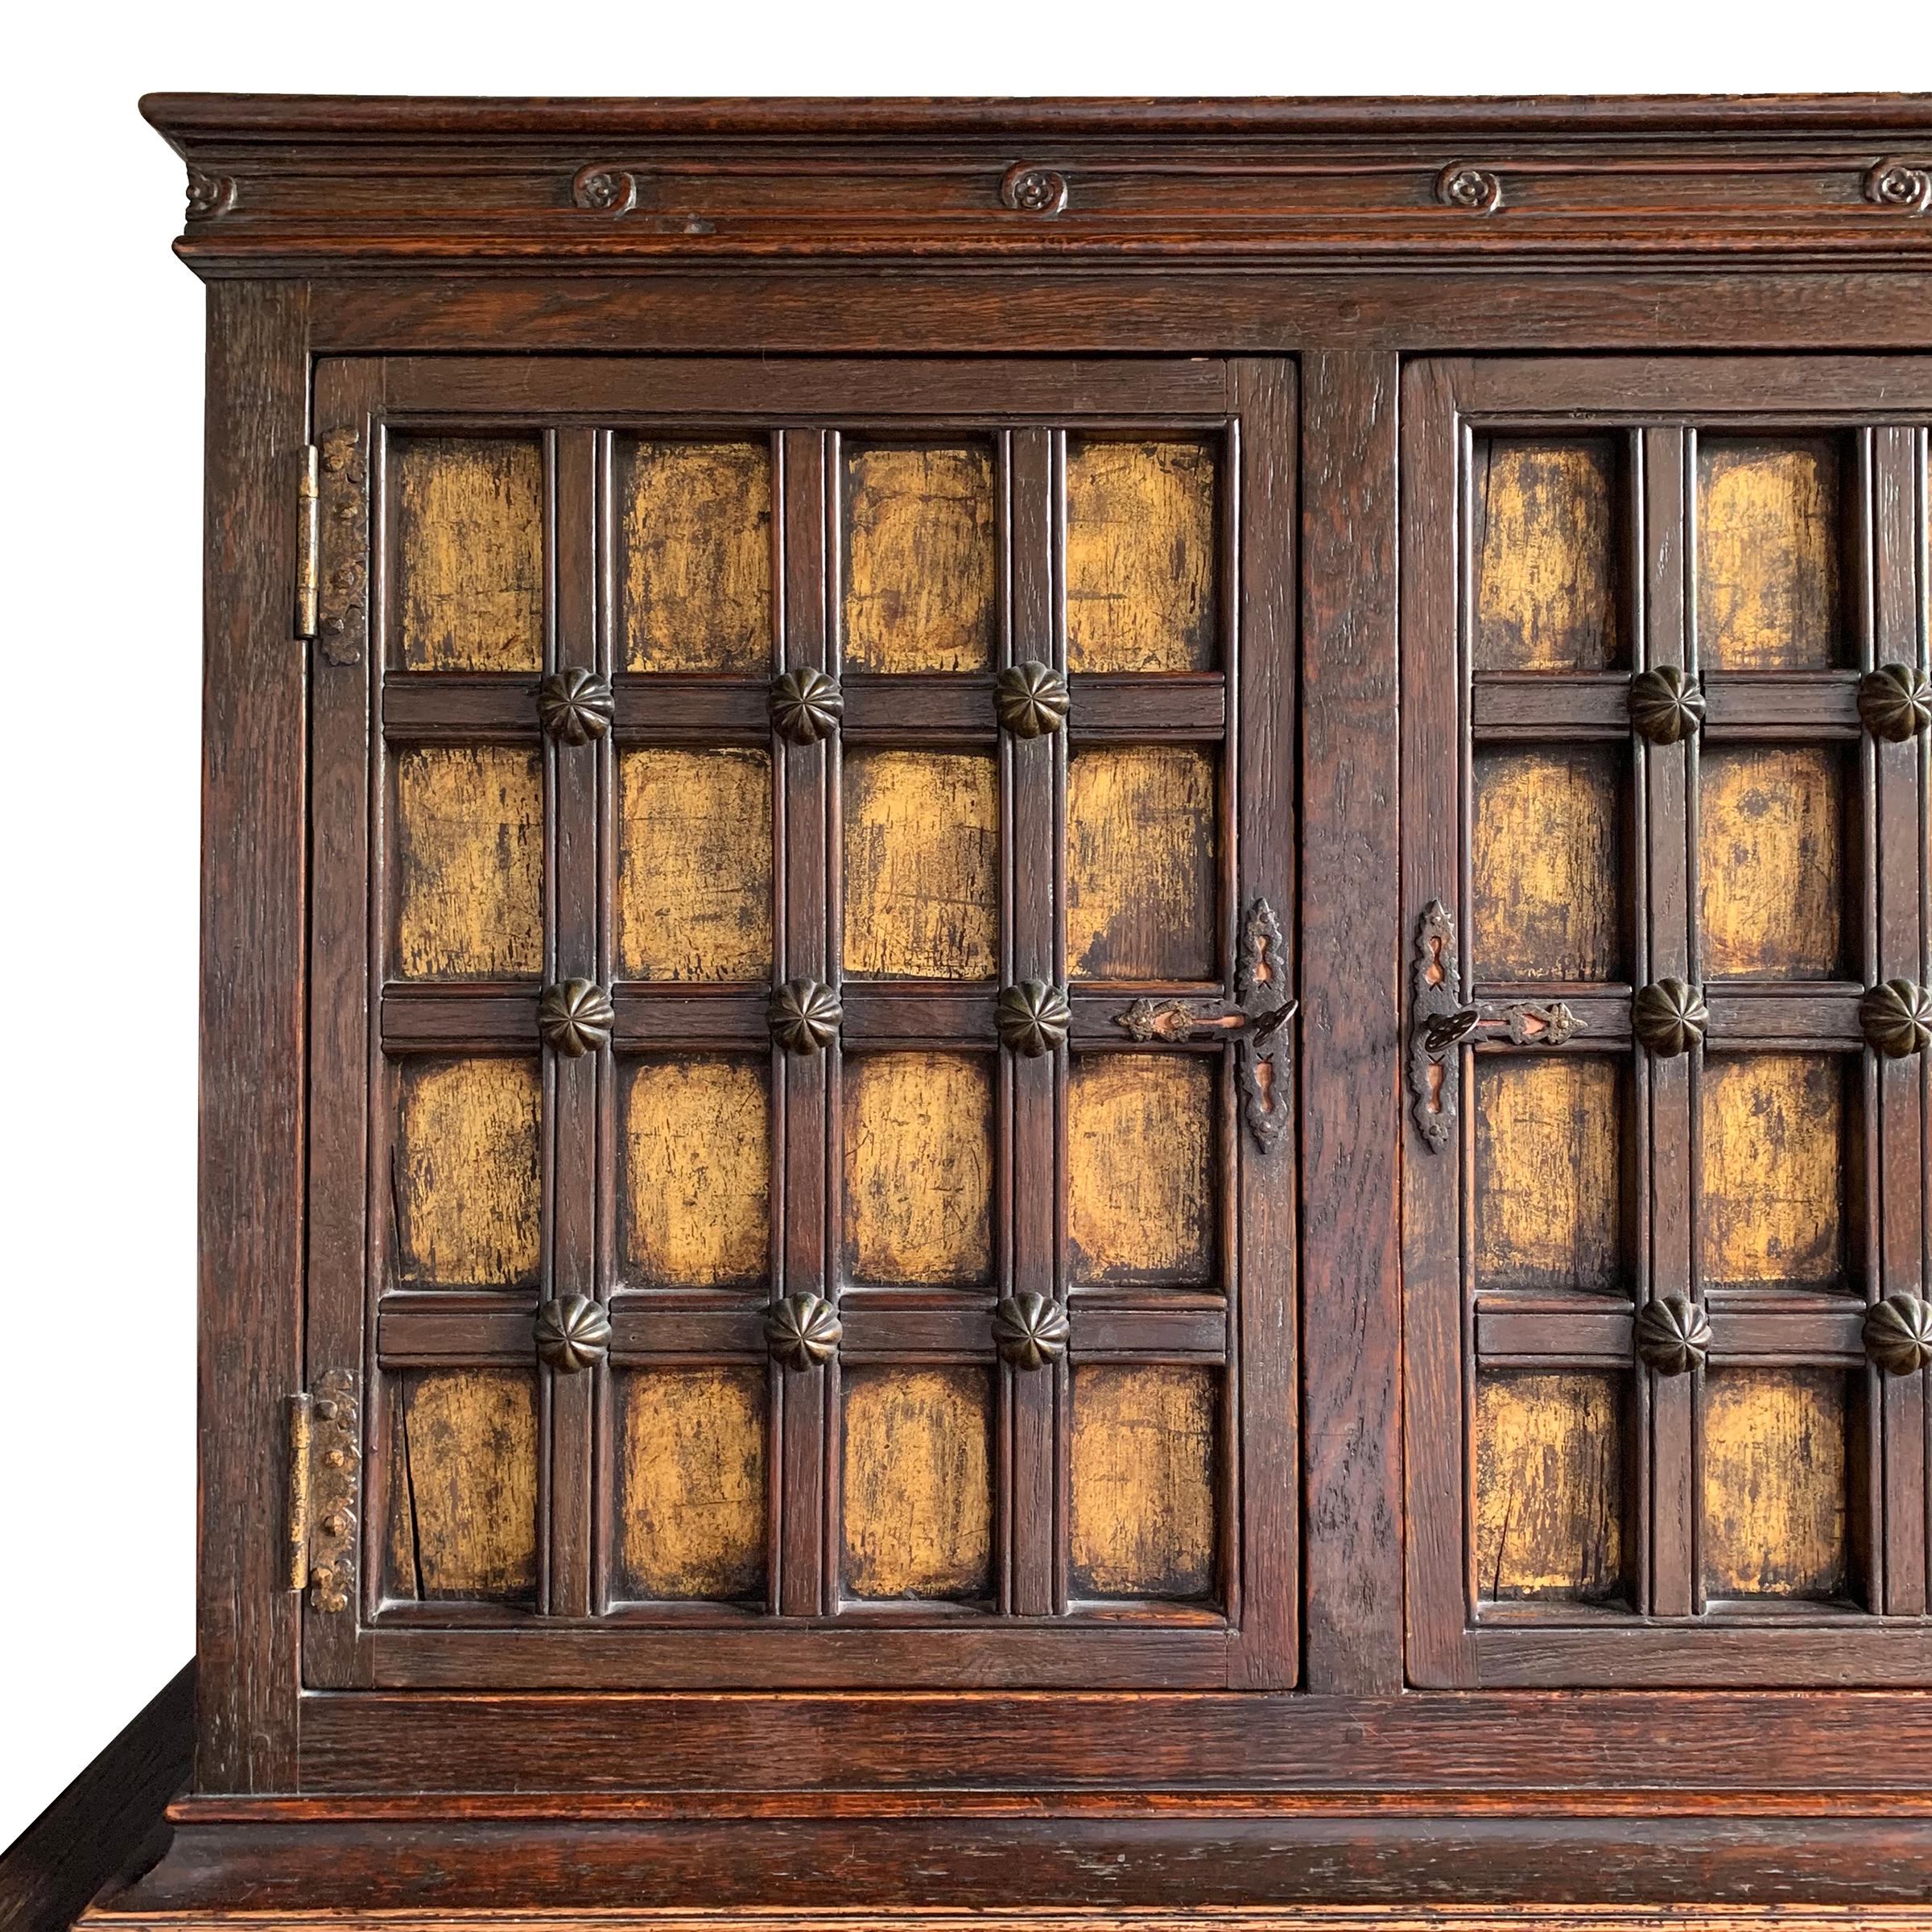 British Early 20th Century Tudor Revival Cabinet with Gold Leaf Paneled Doors